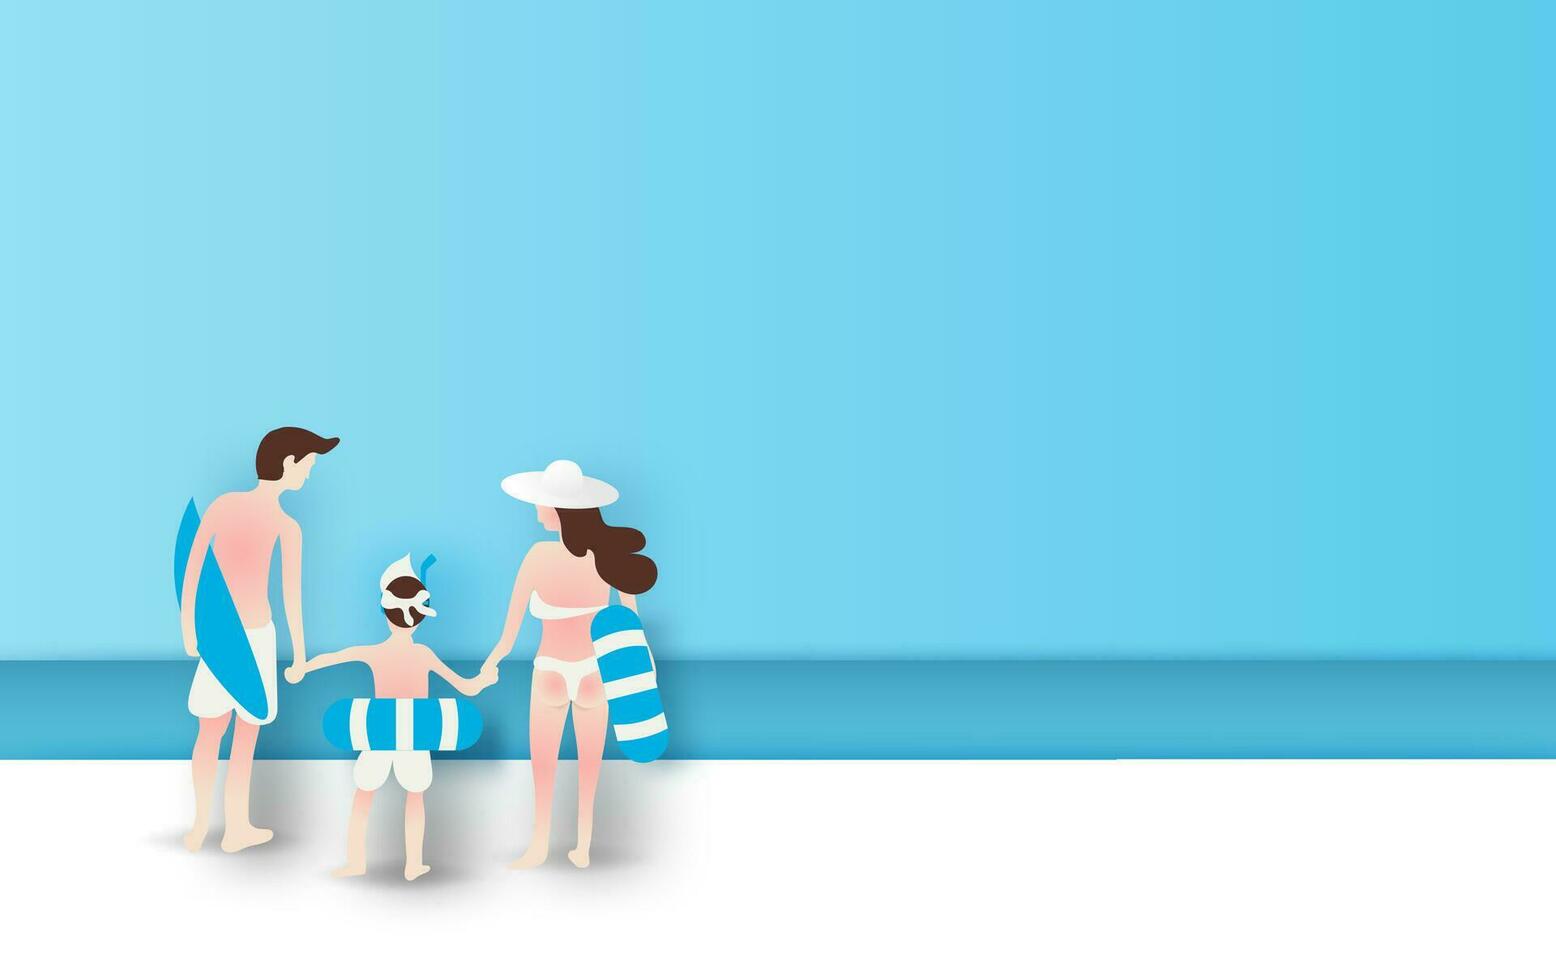 3D illustration of Rear view Young family having Happy fun on the beach.People diving in rubber ring.Modern colorful pastel. Summertime on sea view paper cut and craft concept. Flat cartoon.vector. vector